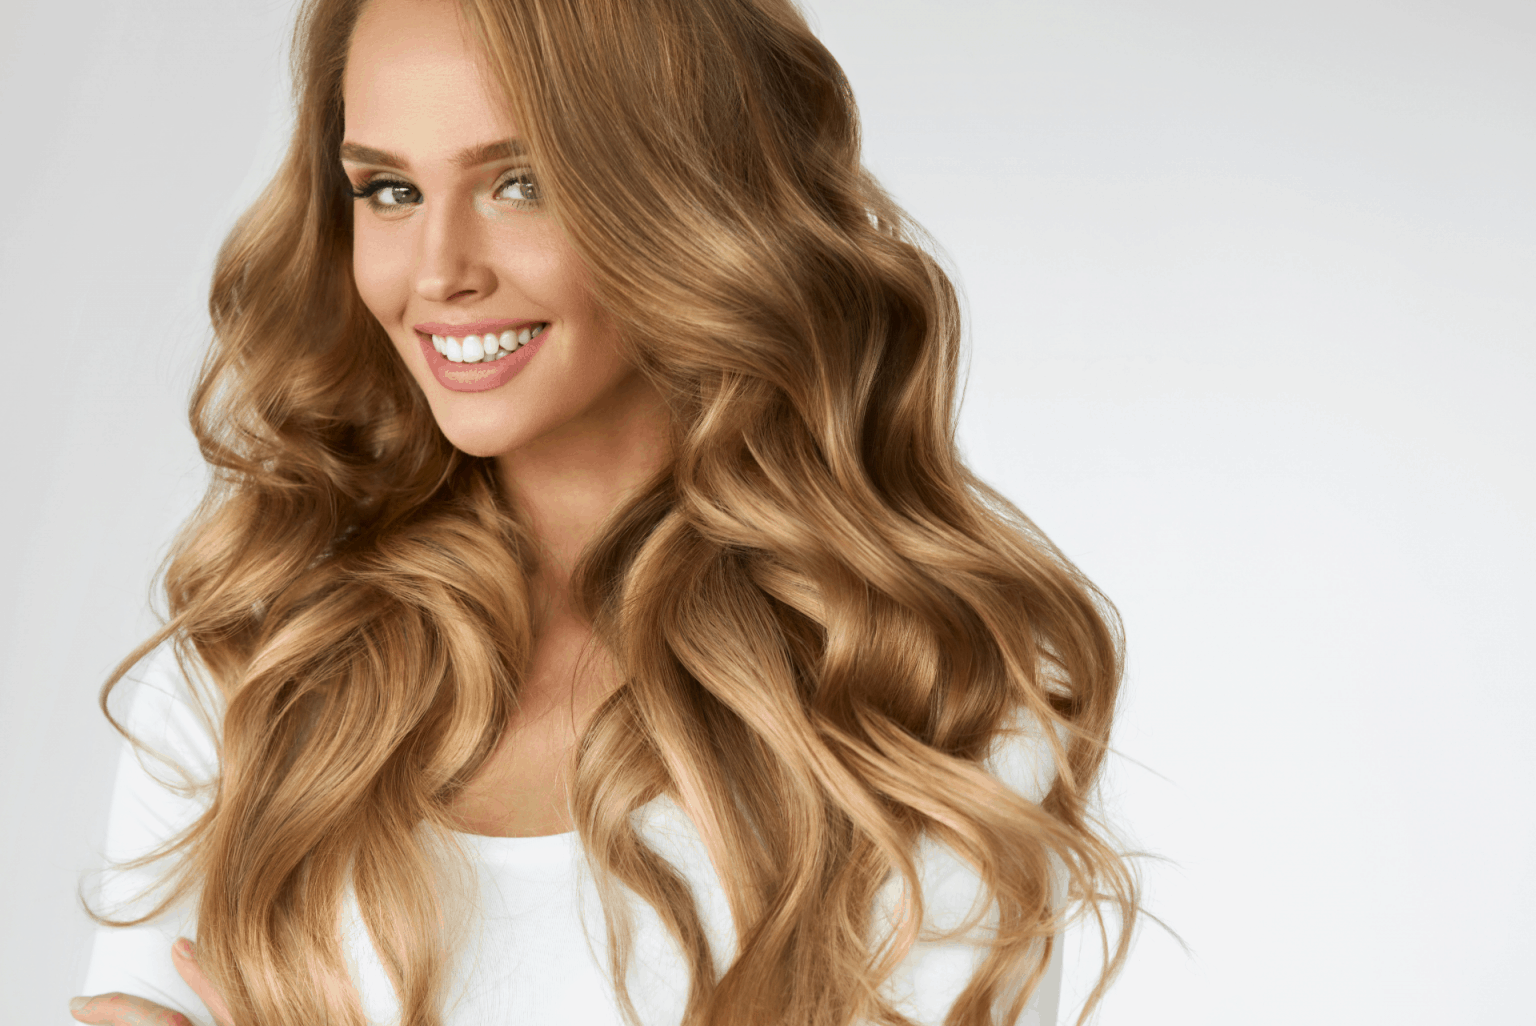 How To Get Highlights And Lighten Hair Without Bleach 4 Steps For Success 4482